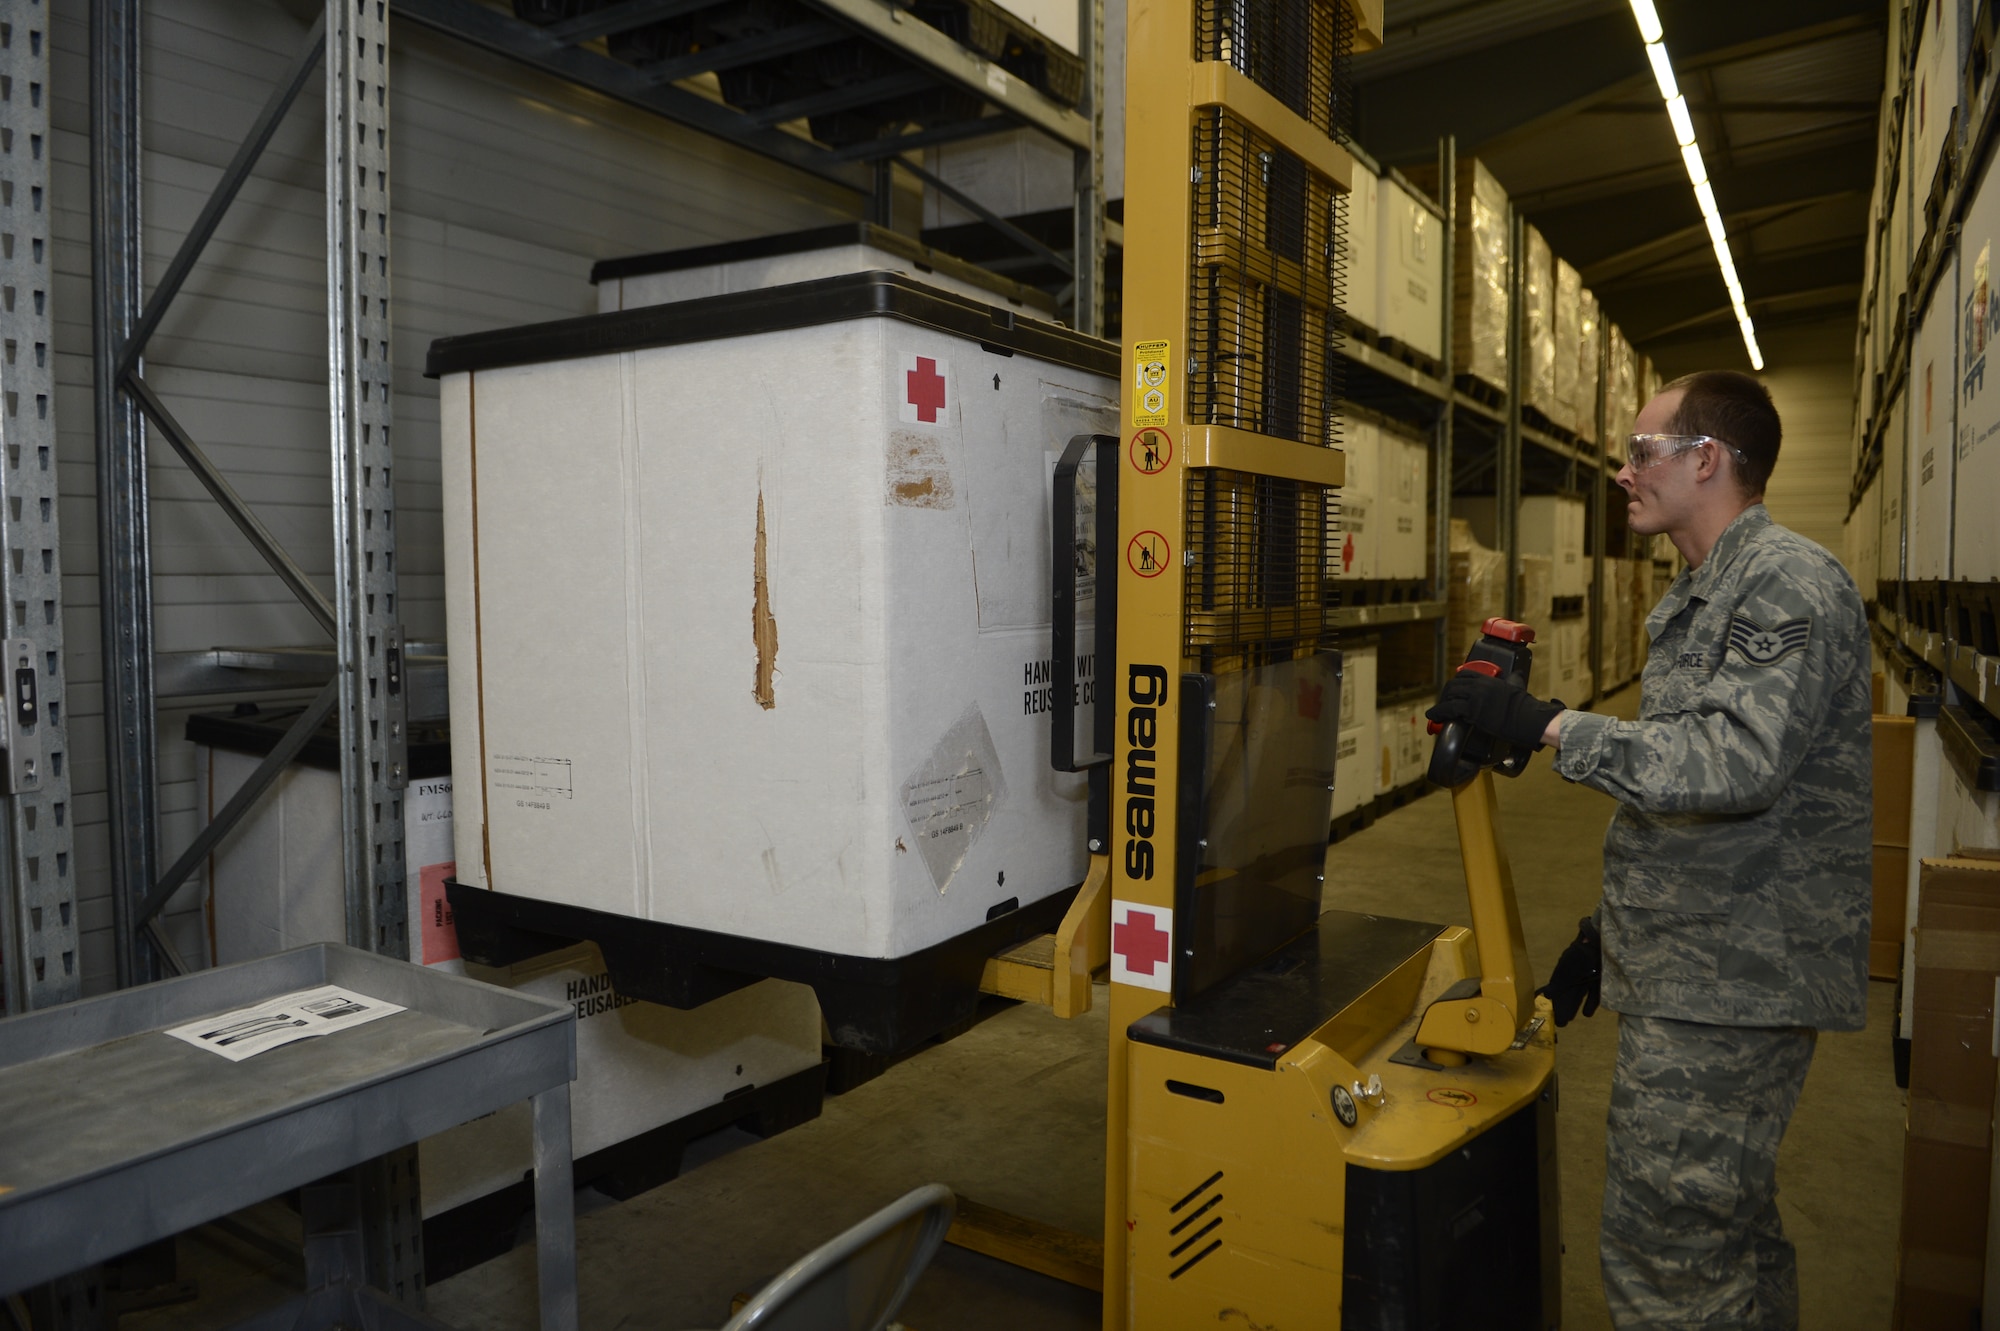 U.S. Air Force Staff Sgt. James Bishop, 52nd Medical Support Squadron medical logistics technician from Fort Worth, Texas, uses a forklift to handle medical storage containers at the 52nd MDSS warehouse in Zemmer, Germany, May 5, 2014. Most medical supplies used by the Spangdahlem Air Base Clinic are delivered here before distribution. (U.S. Air Force photo by Staff Sgt. Christopher Ruano/Released)